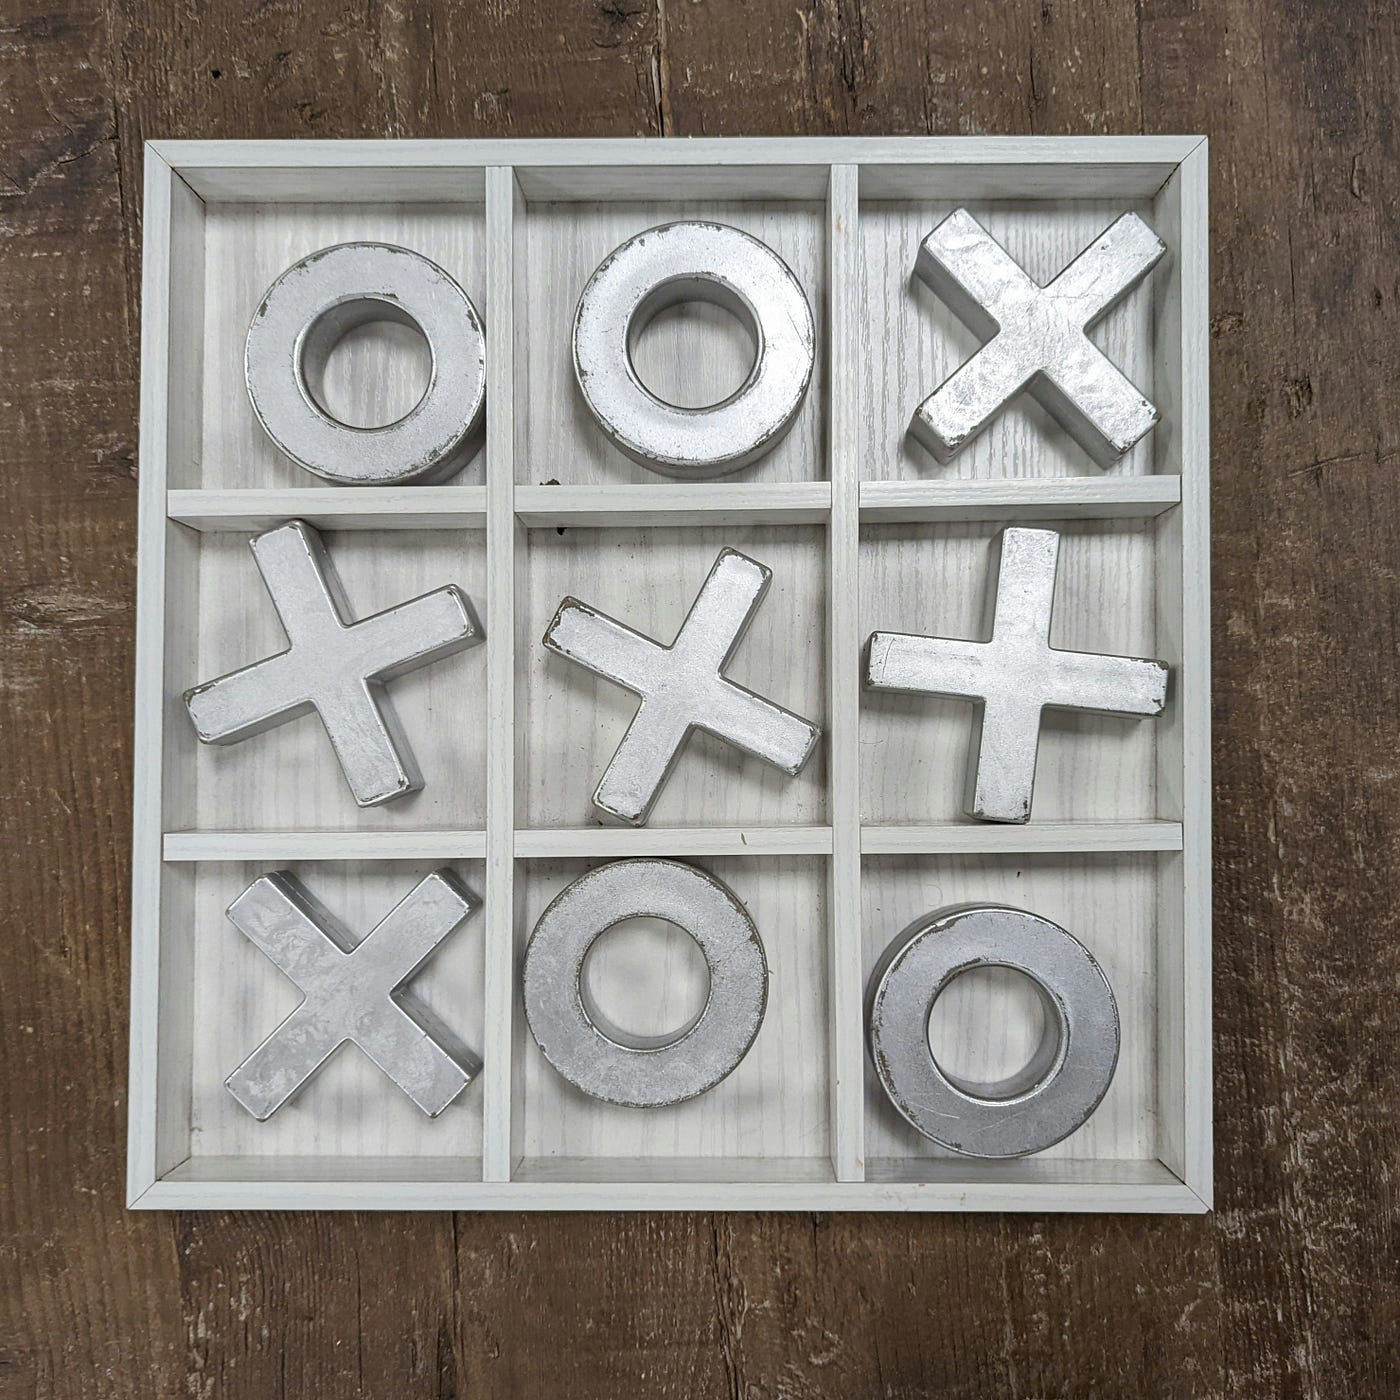 Tic-tac-toe, the other way around!